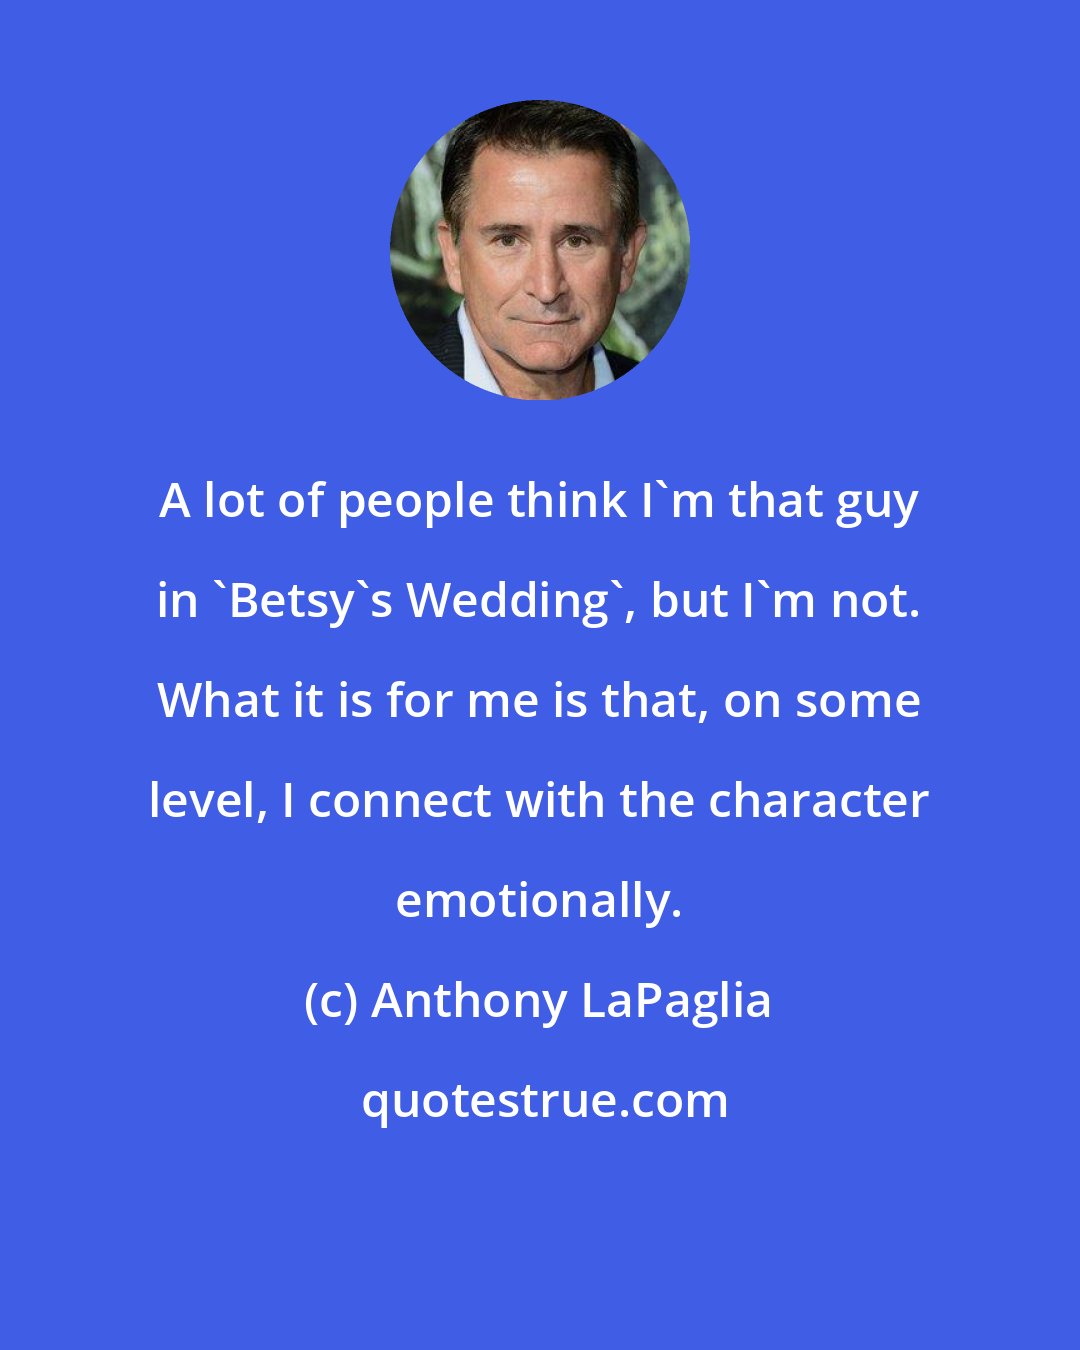 Anthony LaPaglia: A lot of people think I'm that guy in 'Betsy's Wedding', but I'm not. What it is for me is that, on some level, I connect with the character emotionally.